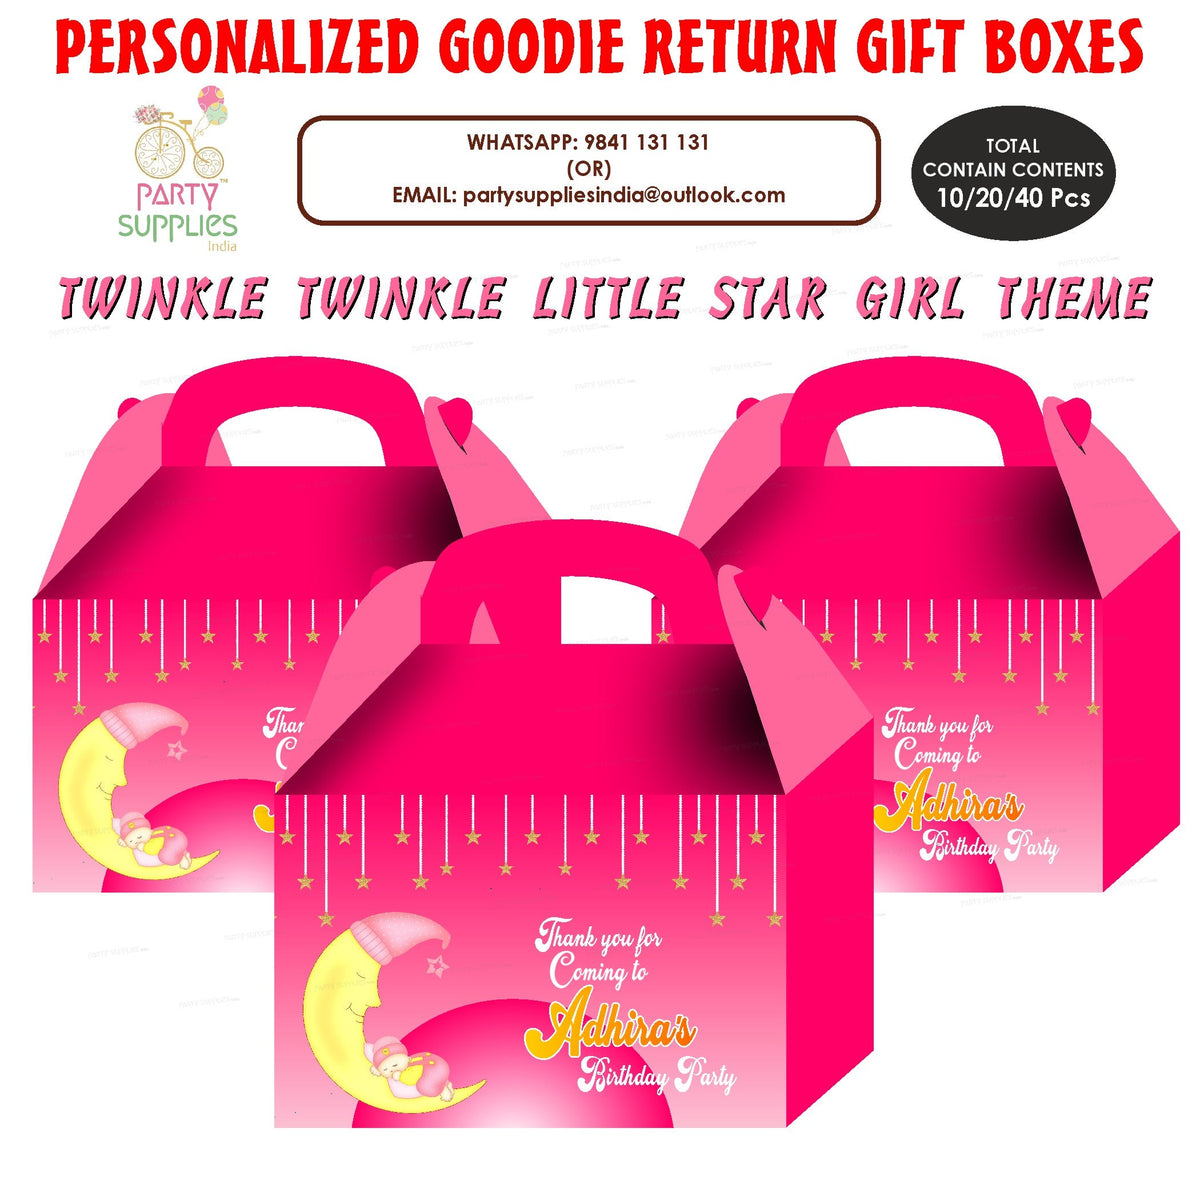 PSI Twinkle Twinkle Little Star Girl Theme Goodie Return Gift Boxes